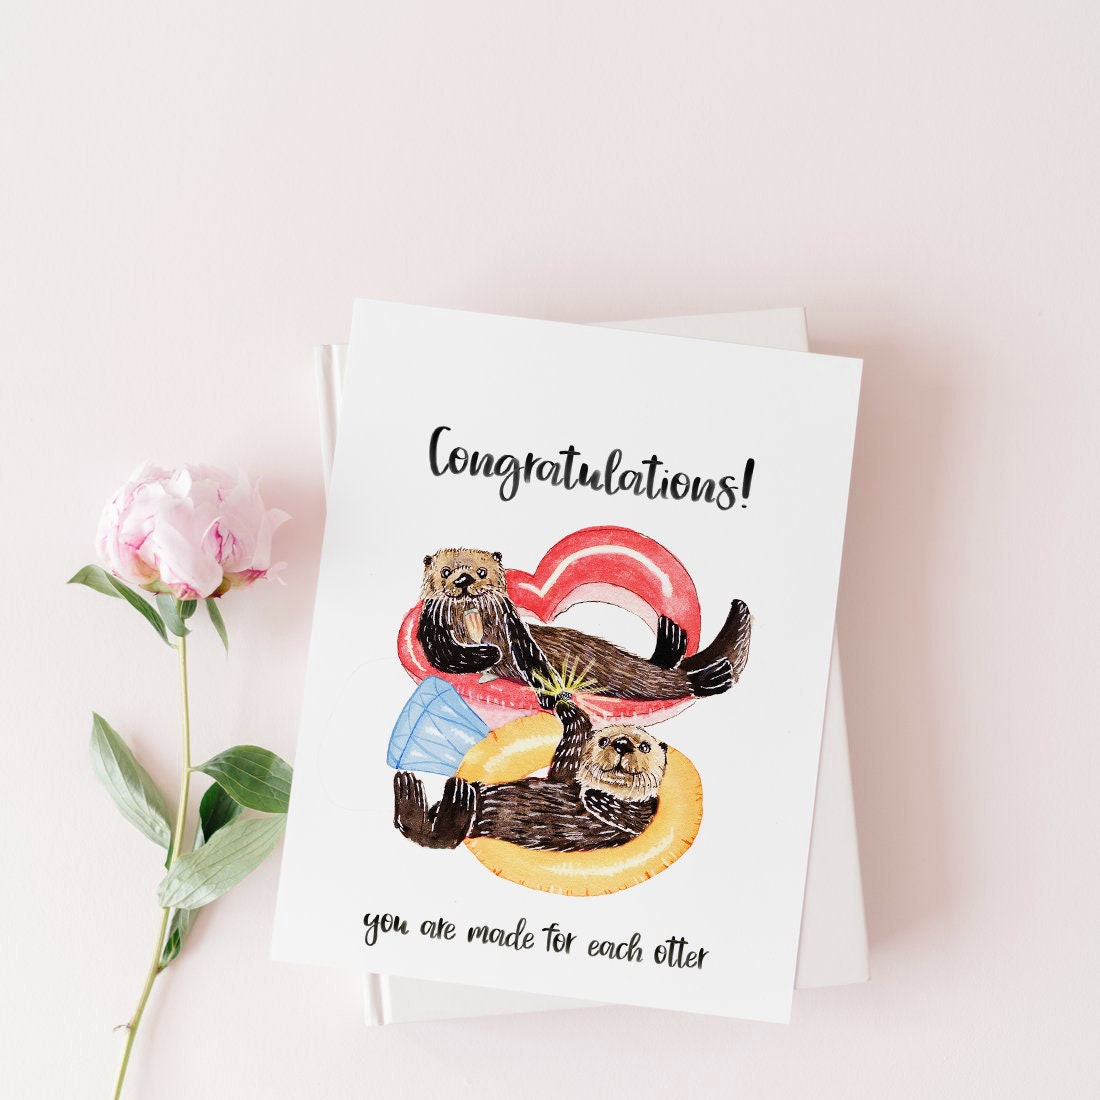 Significant Otter Funny Wedding Card For Friends - Congrats On Engagement Card Funny